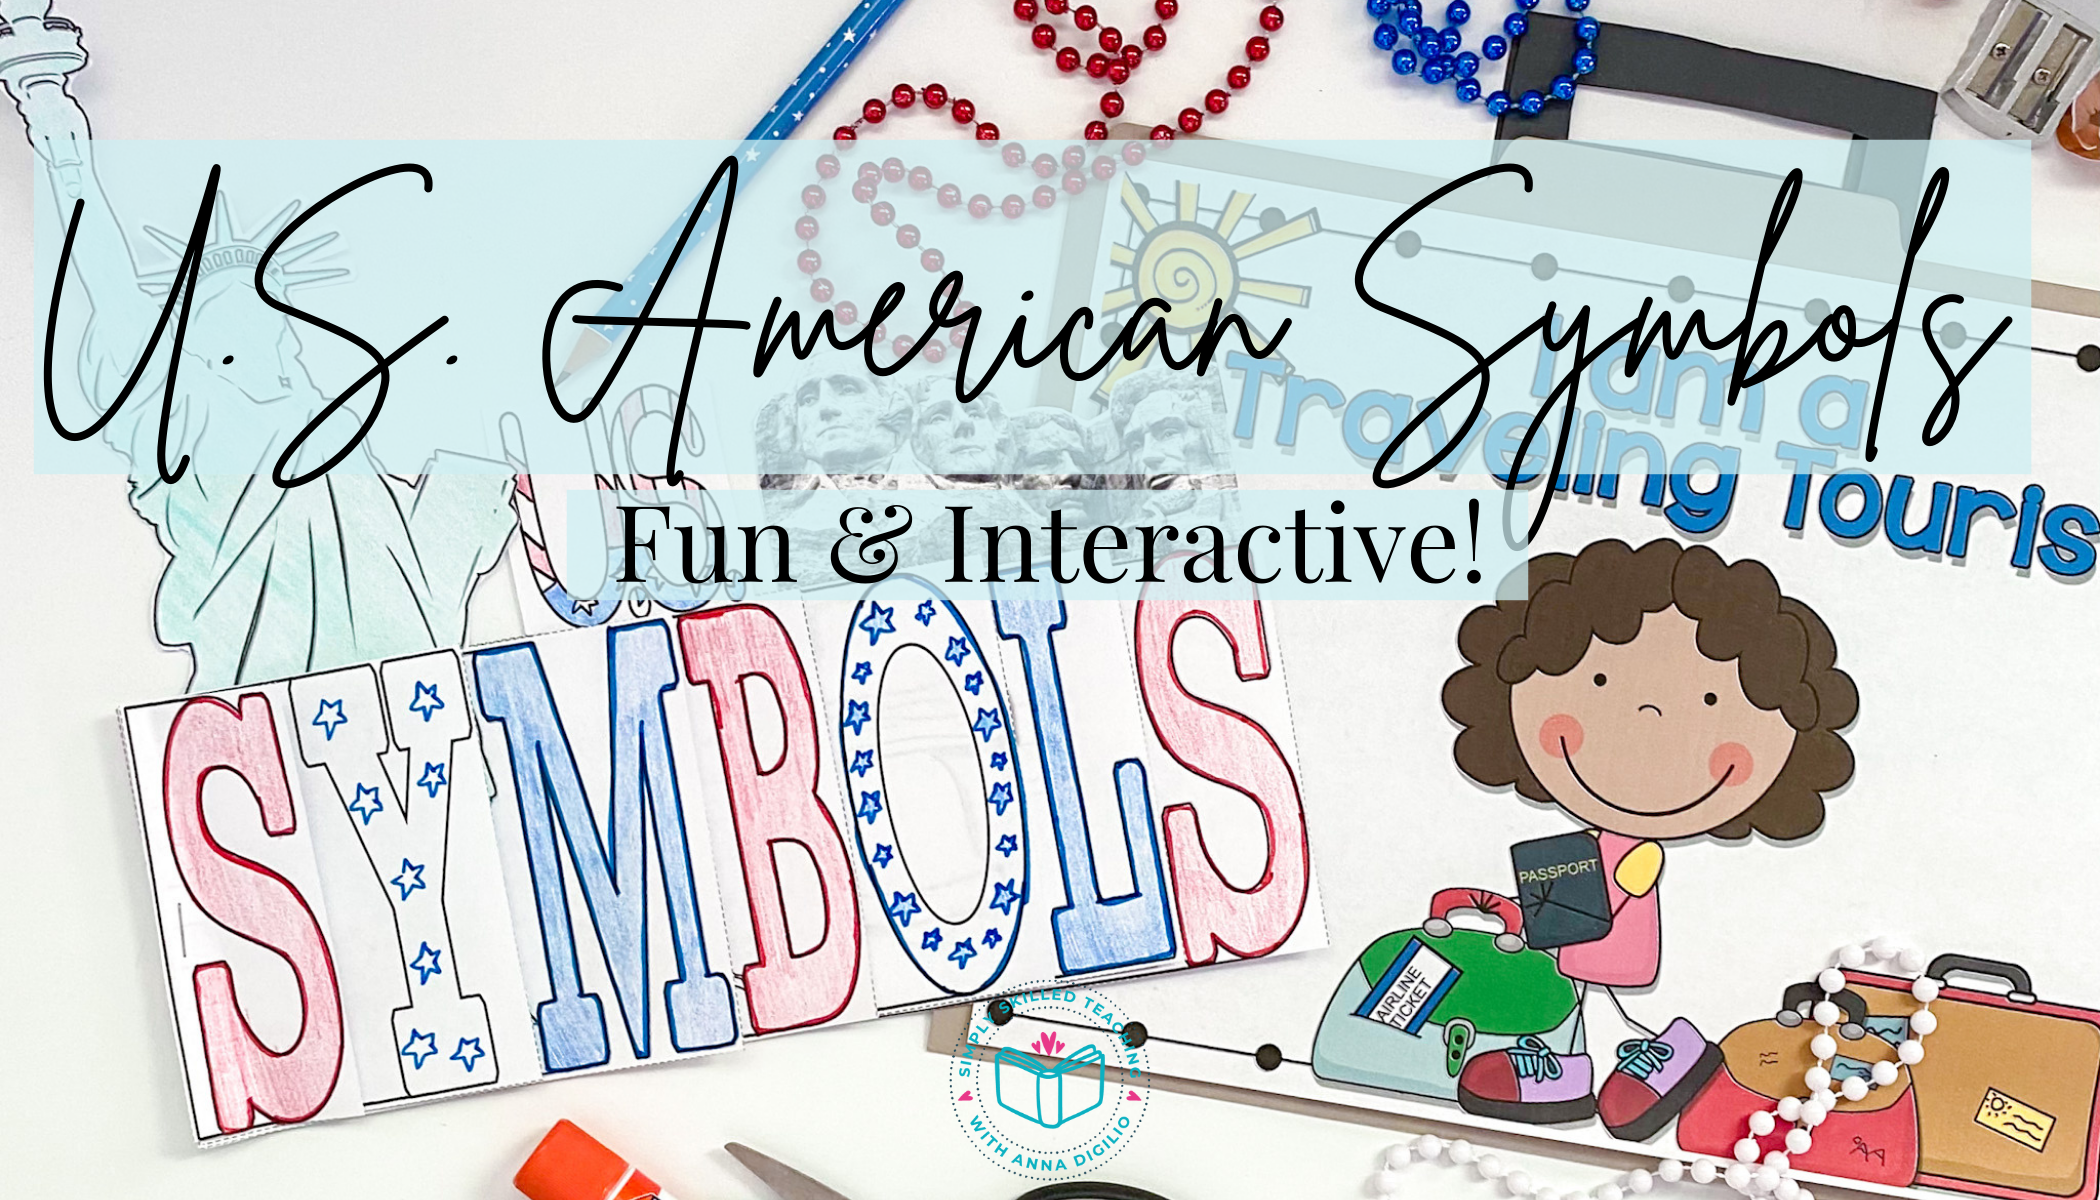 US America Symbols Fun and Interactive Featured Image